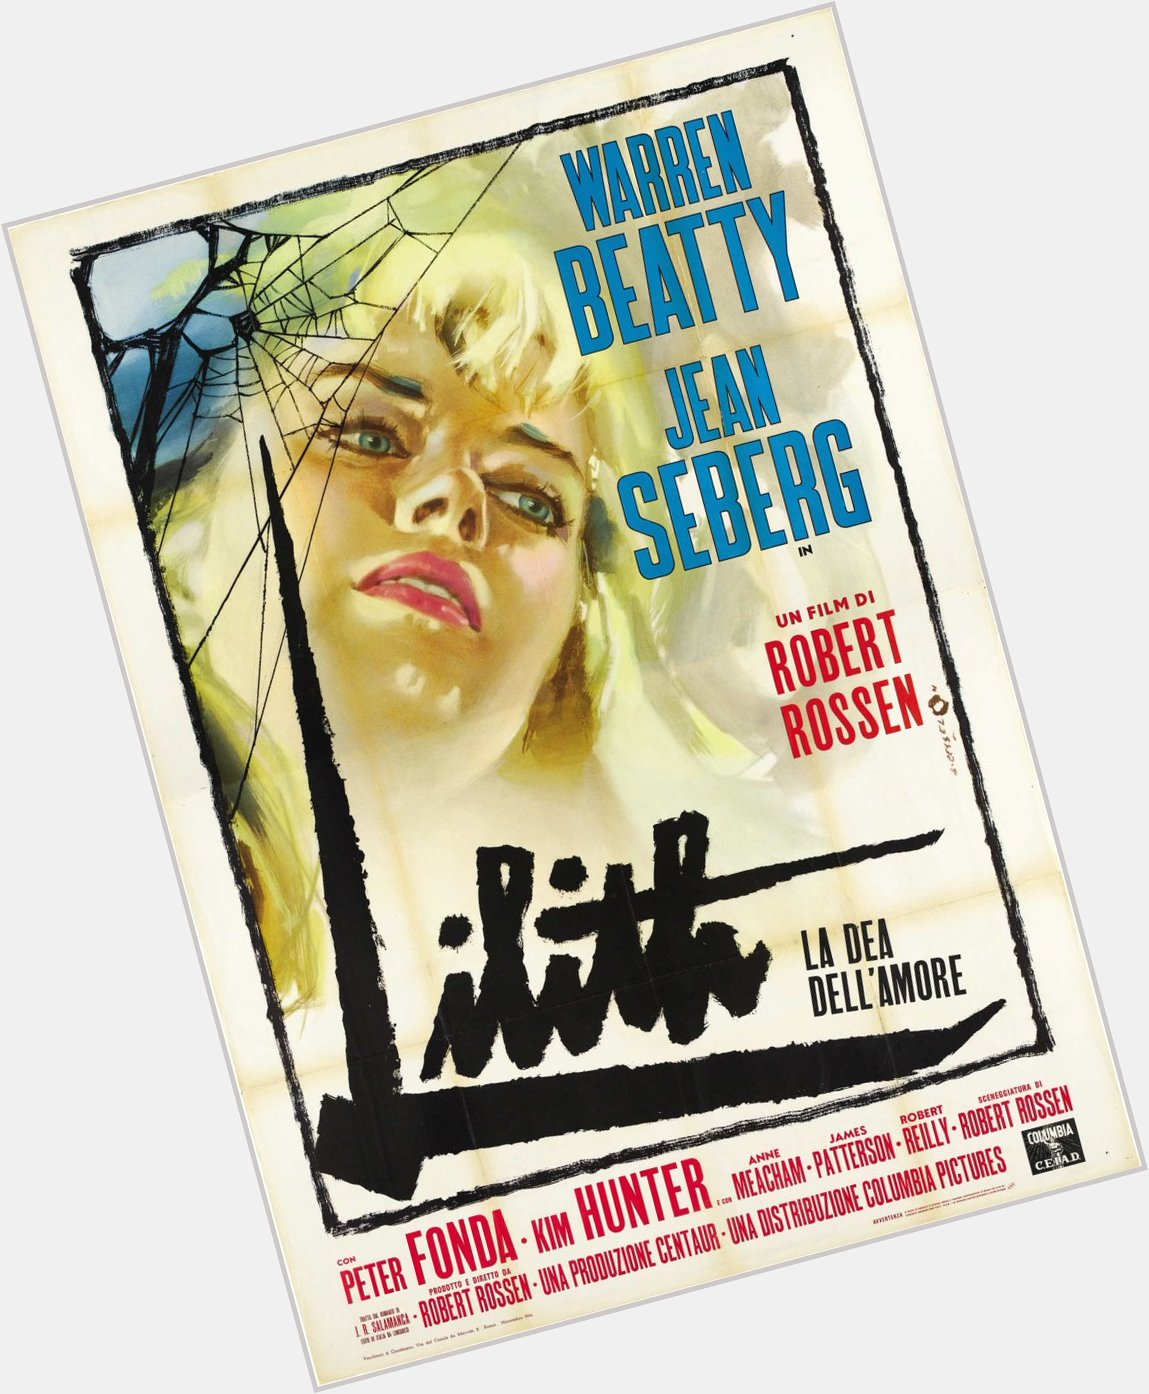 Happy birthday to the exquisite Jean Seberg - LILITH - 1964 - Italian release poster 